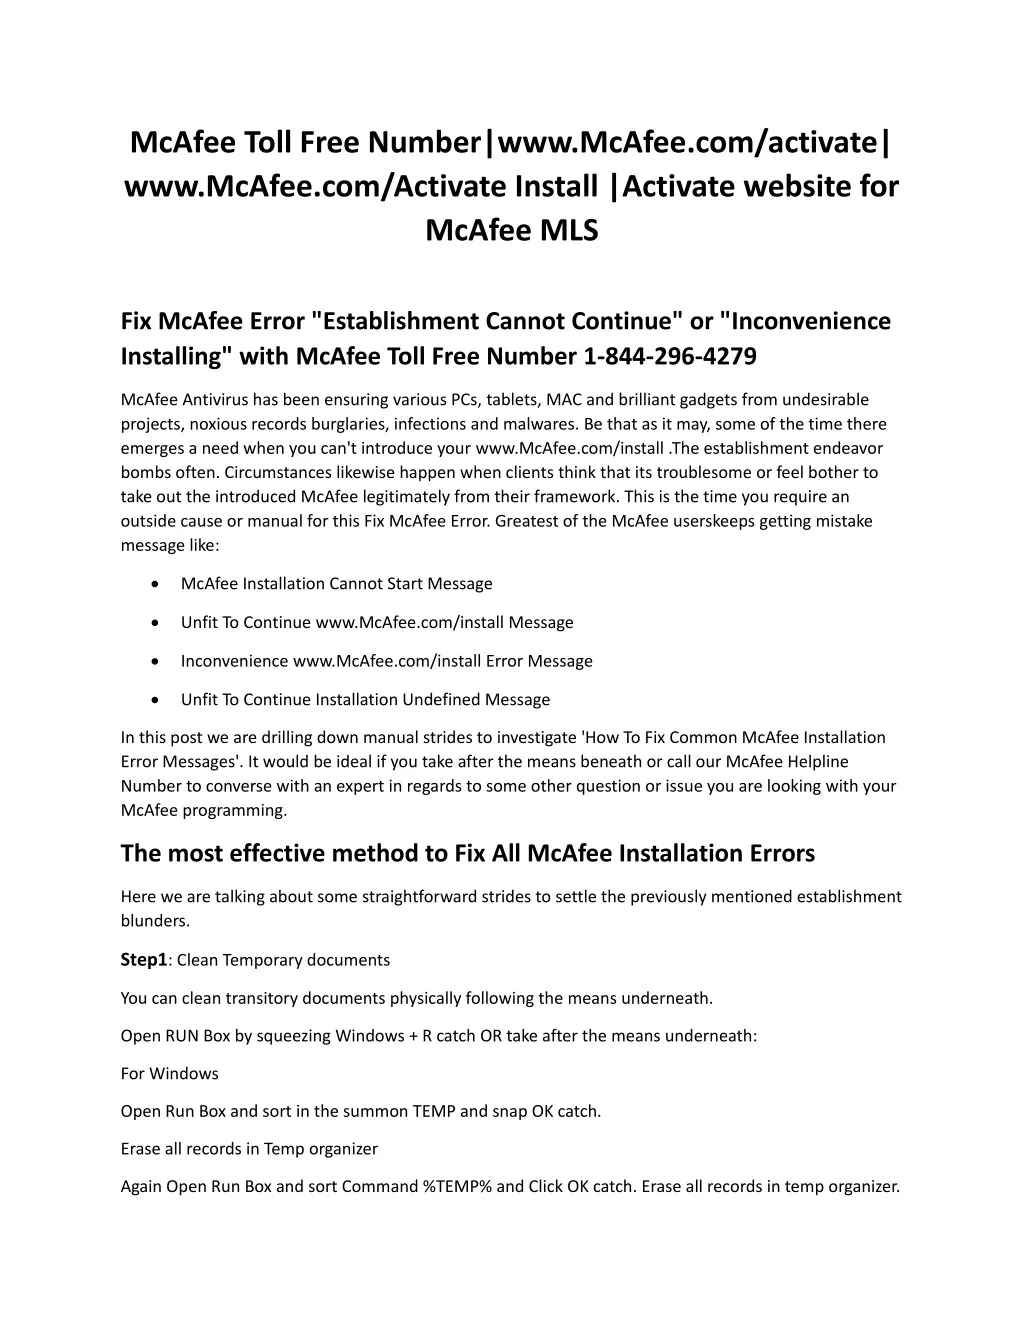 mcafee toll free number www mcafee com activate